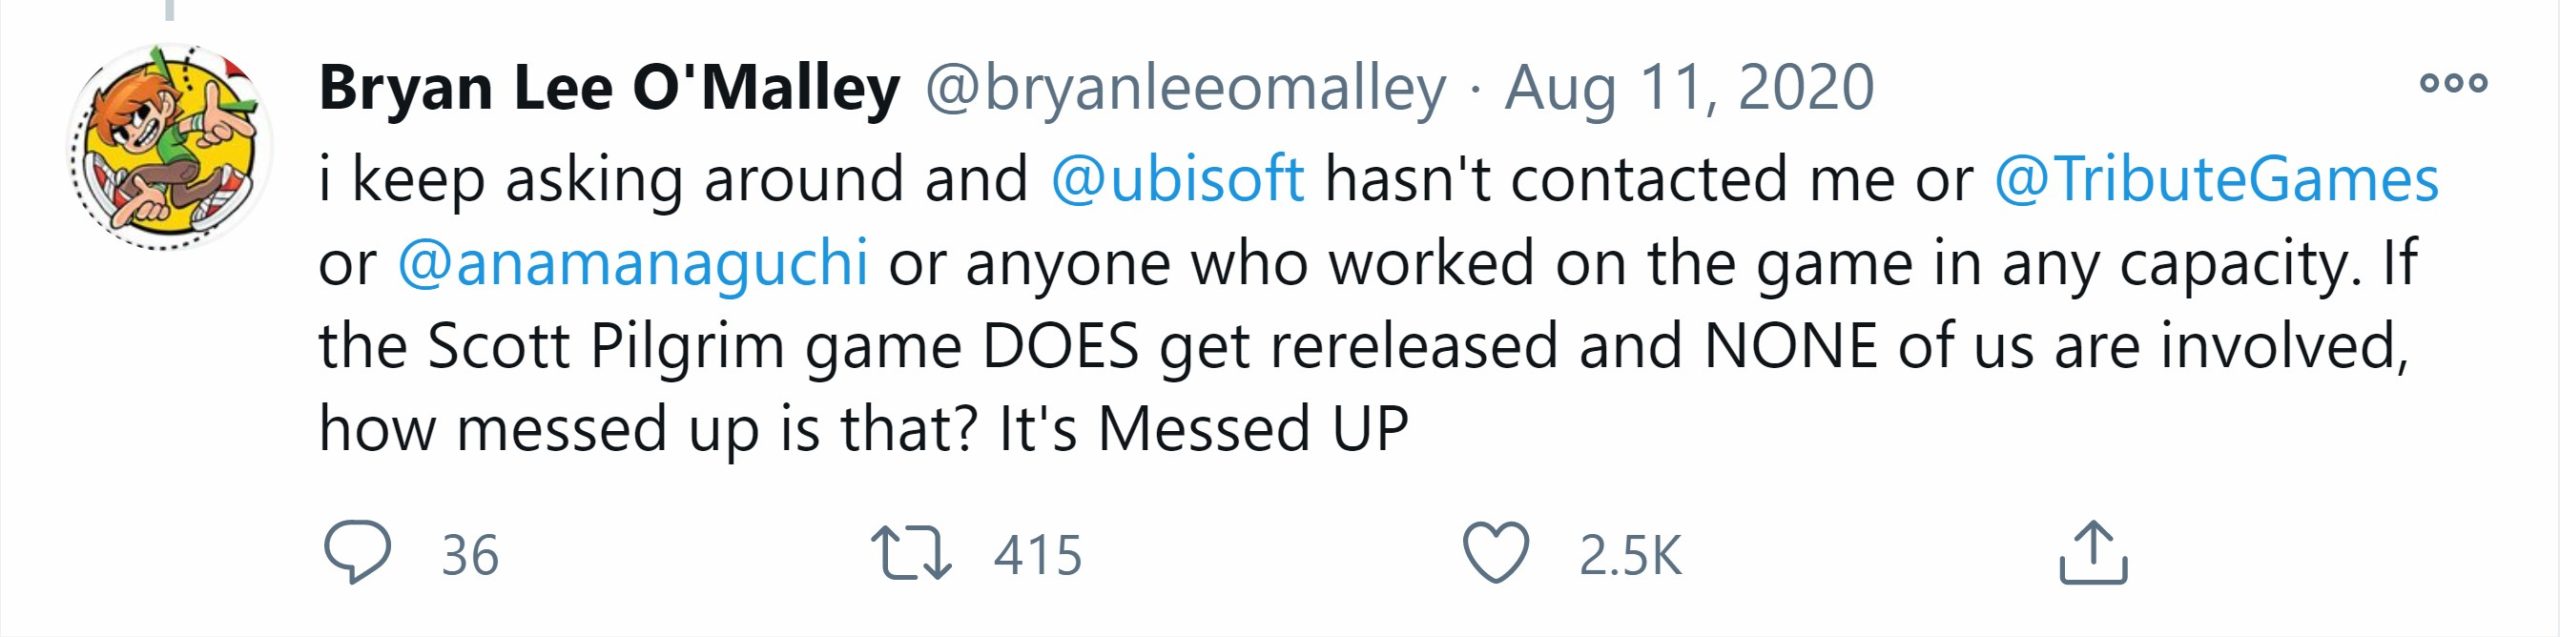 A tweet from Bryan Lee O'Malley reading: i keep asking around and  @ubisoft  hasn't contacted me or  @TributeGames  or  @anamanaguchi  or anyone who worked on the game in any capacity. If the Scott Pilgrim game DOES get rereleased and NONE of us are involved, how messed up is that? It's Messed UP